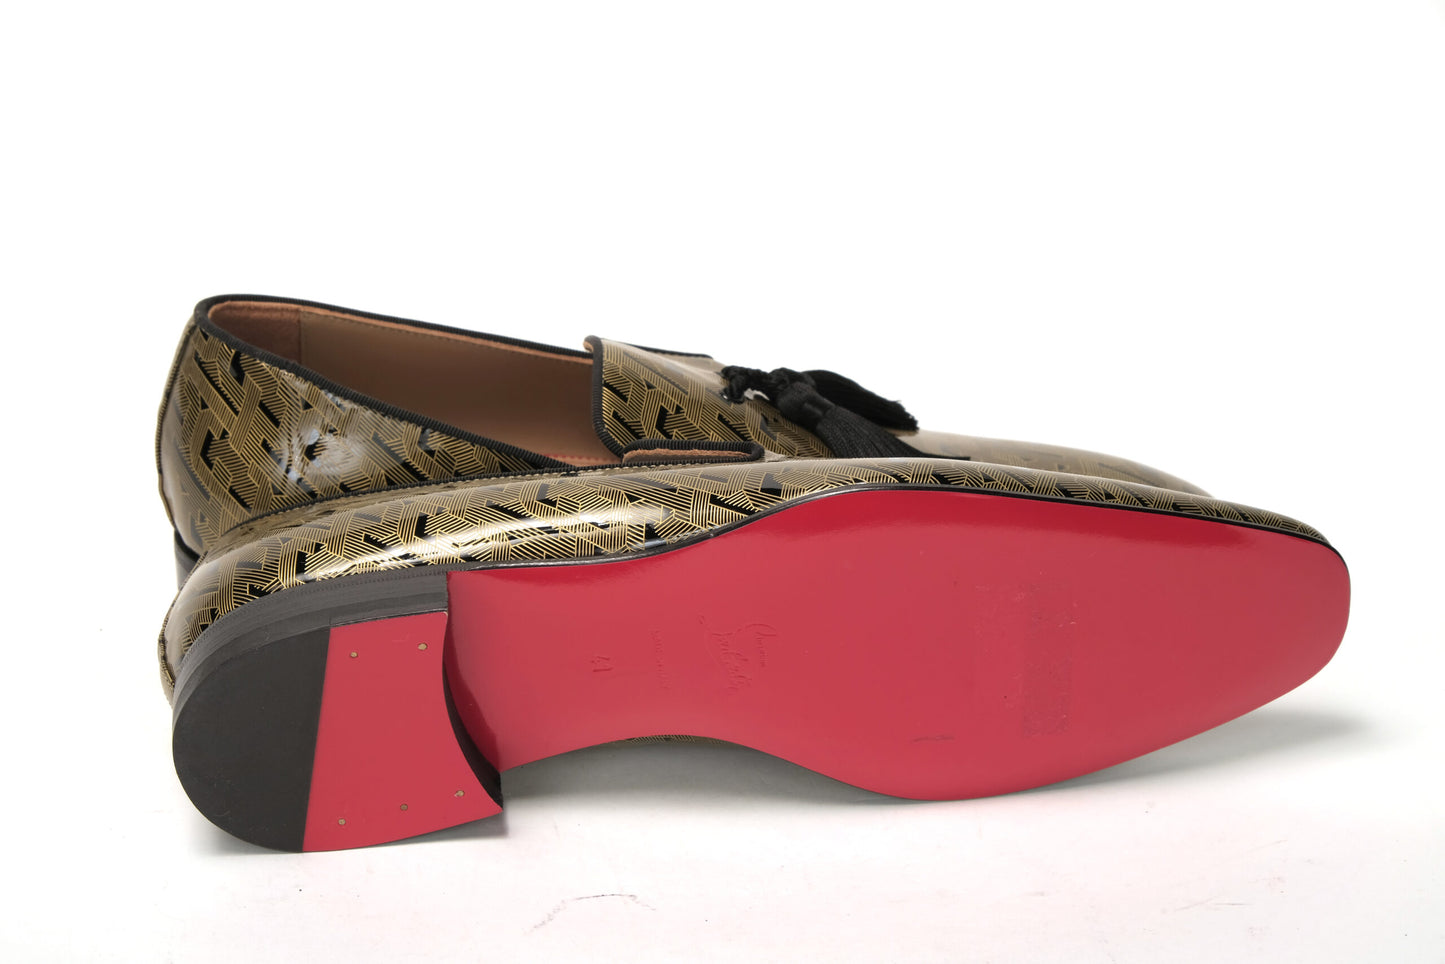 Christian Louboutin Black/Gold Officialito Flat Shoes